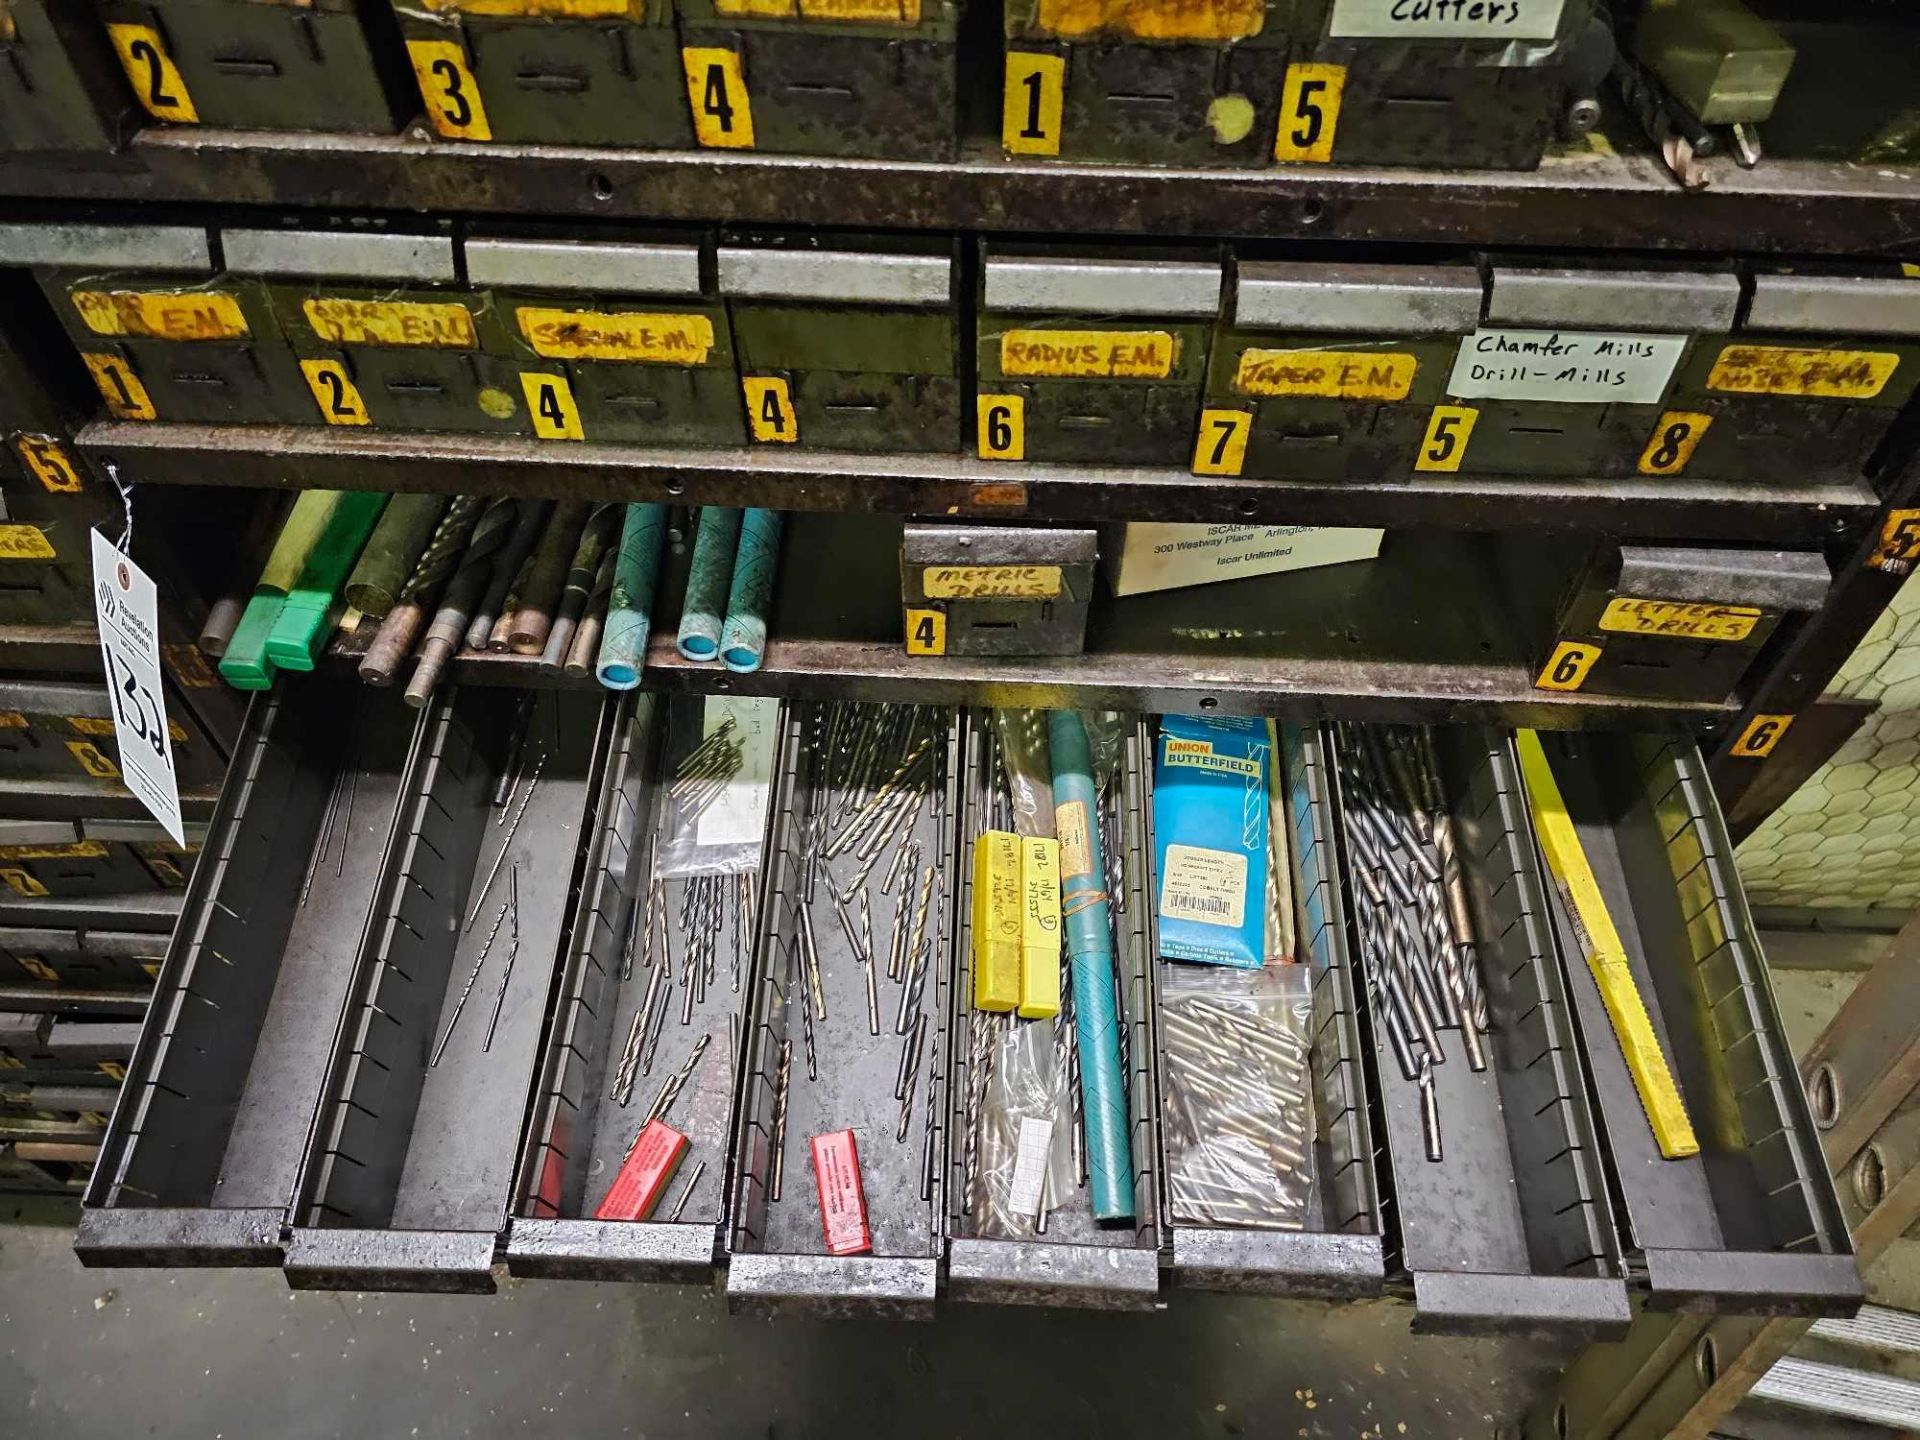 SHELVING W/ CUTTER, TAP, REAMER, MILL, DRILL BIT, DRILL, COUNTERSINK, COUNTERBORE TOOLS & FASTENERS - Image 26 of 31